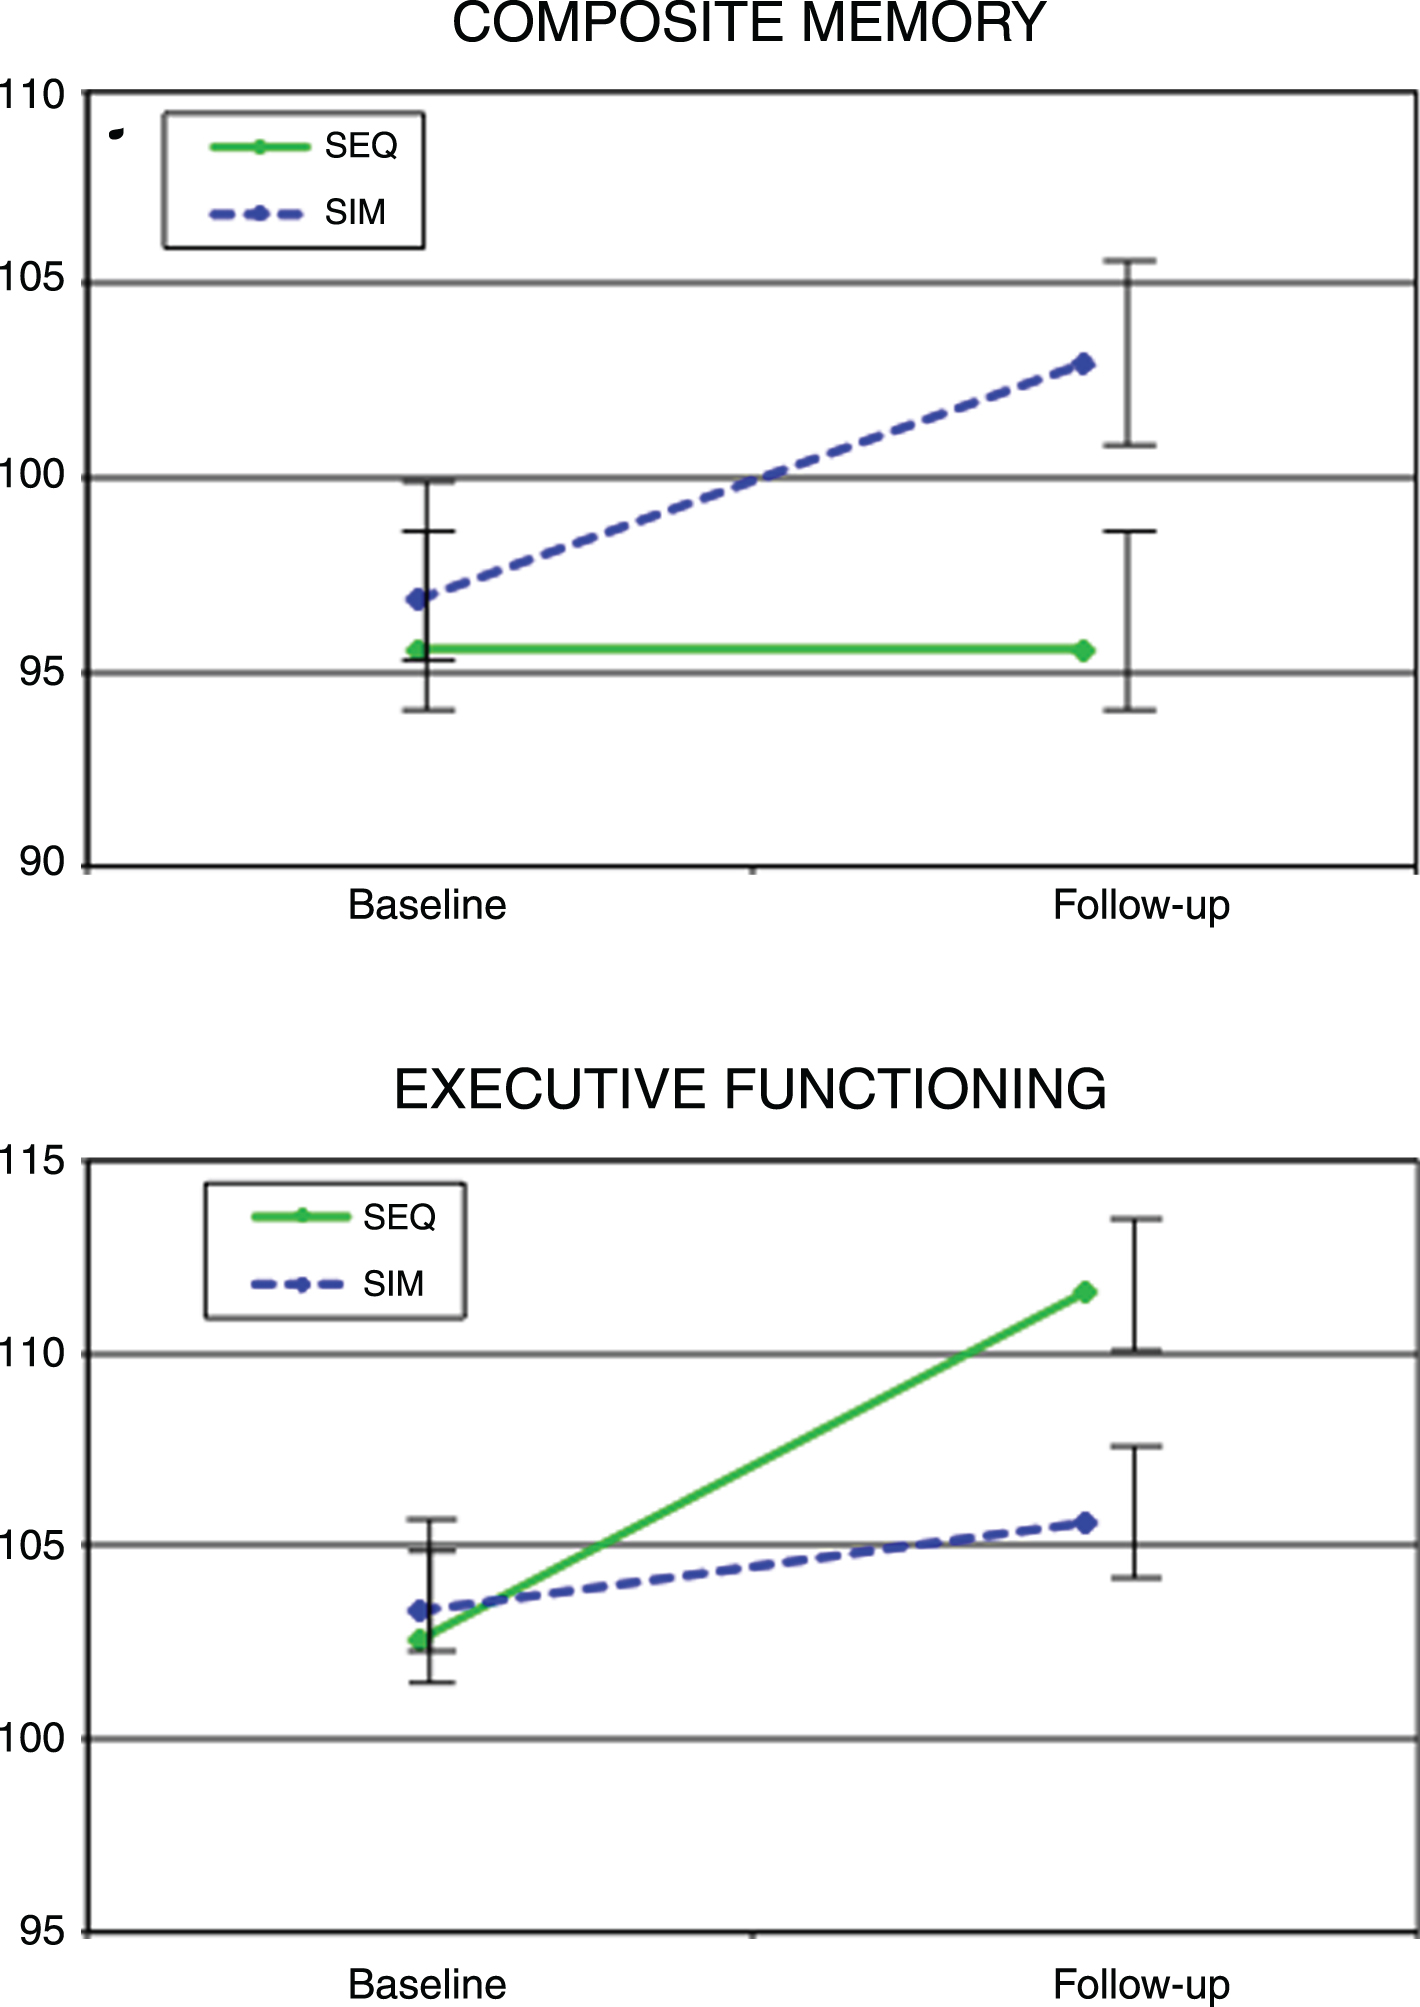 Cognitive performance in Composite memory and Executive Functioning standard scores from baseline to immediately post-intervention for the simultaneous exercise and memory training (SIM) and sequential exercise and memory training (SEQ) groups. Error bars represent 95% confidence limits.